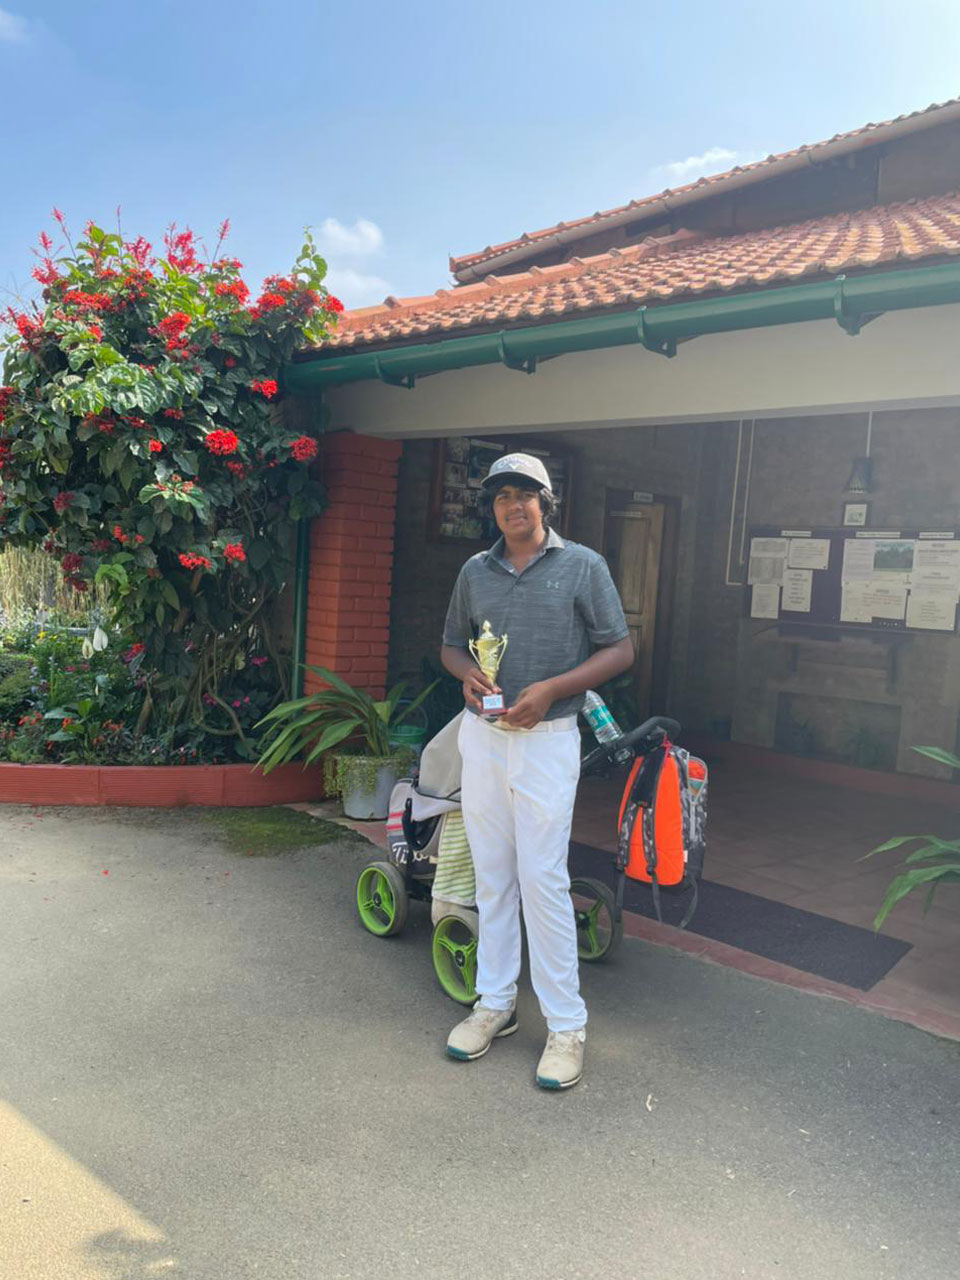 Shamit had a second-place finish after a play-off at the South Zone tournament in CGL